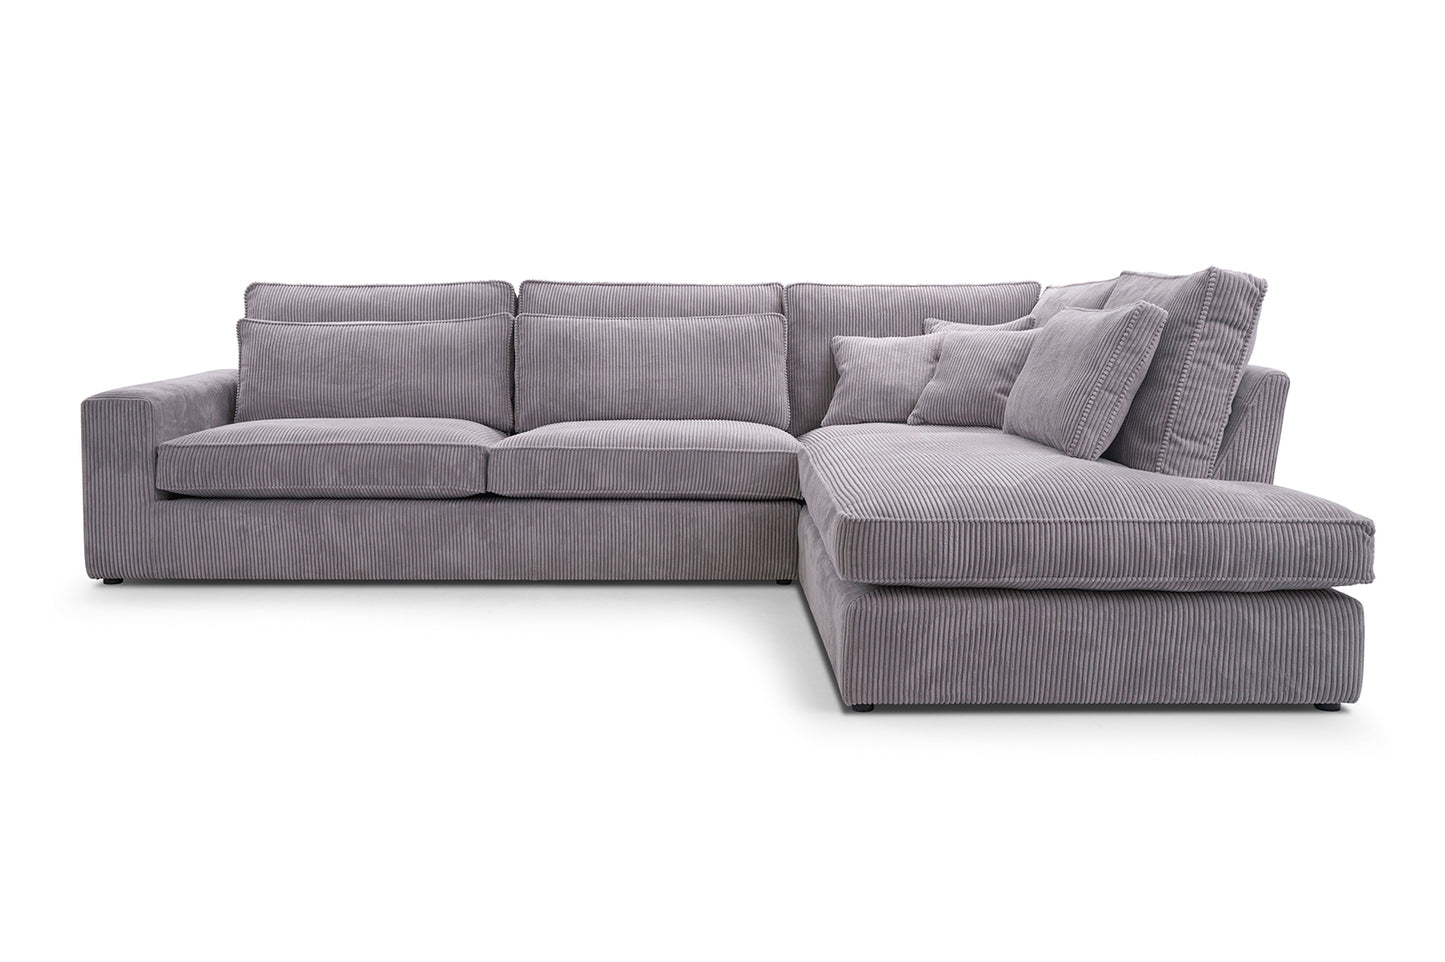 COBY - Very comfortable and elegant Corner Sofa with an awesome set of cushions >314x224cm<